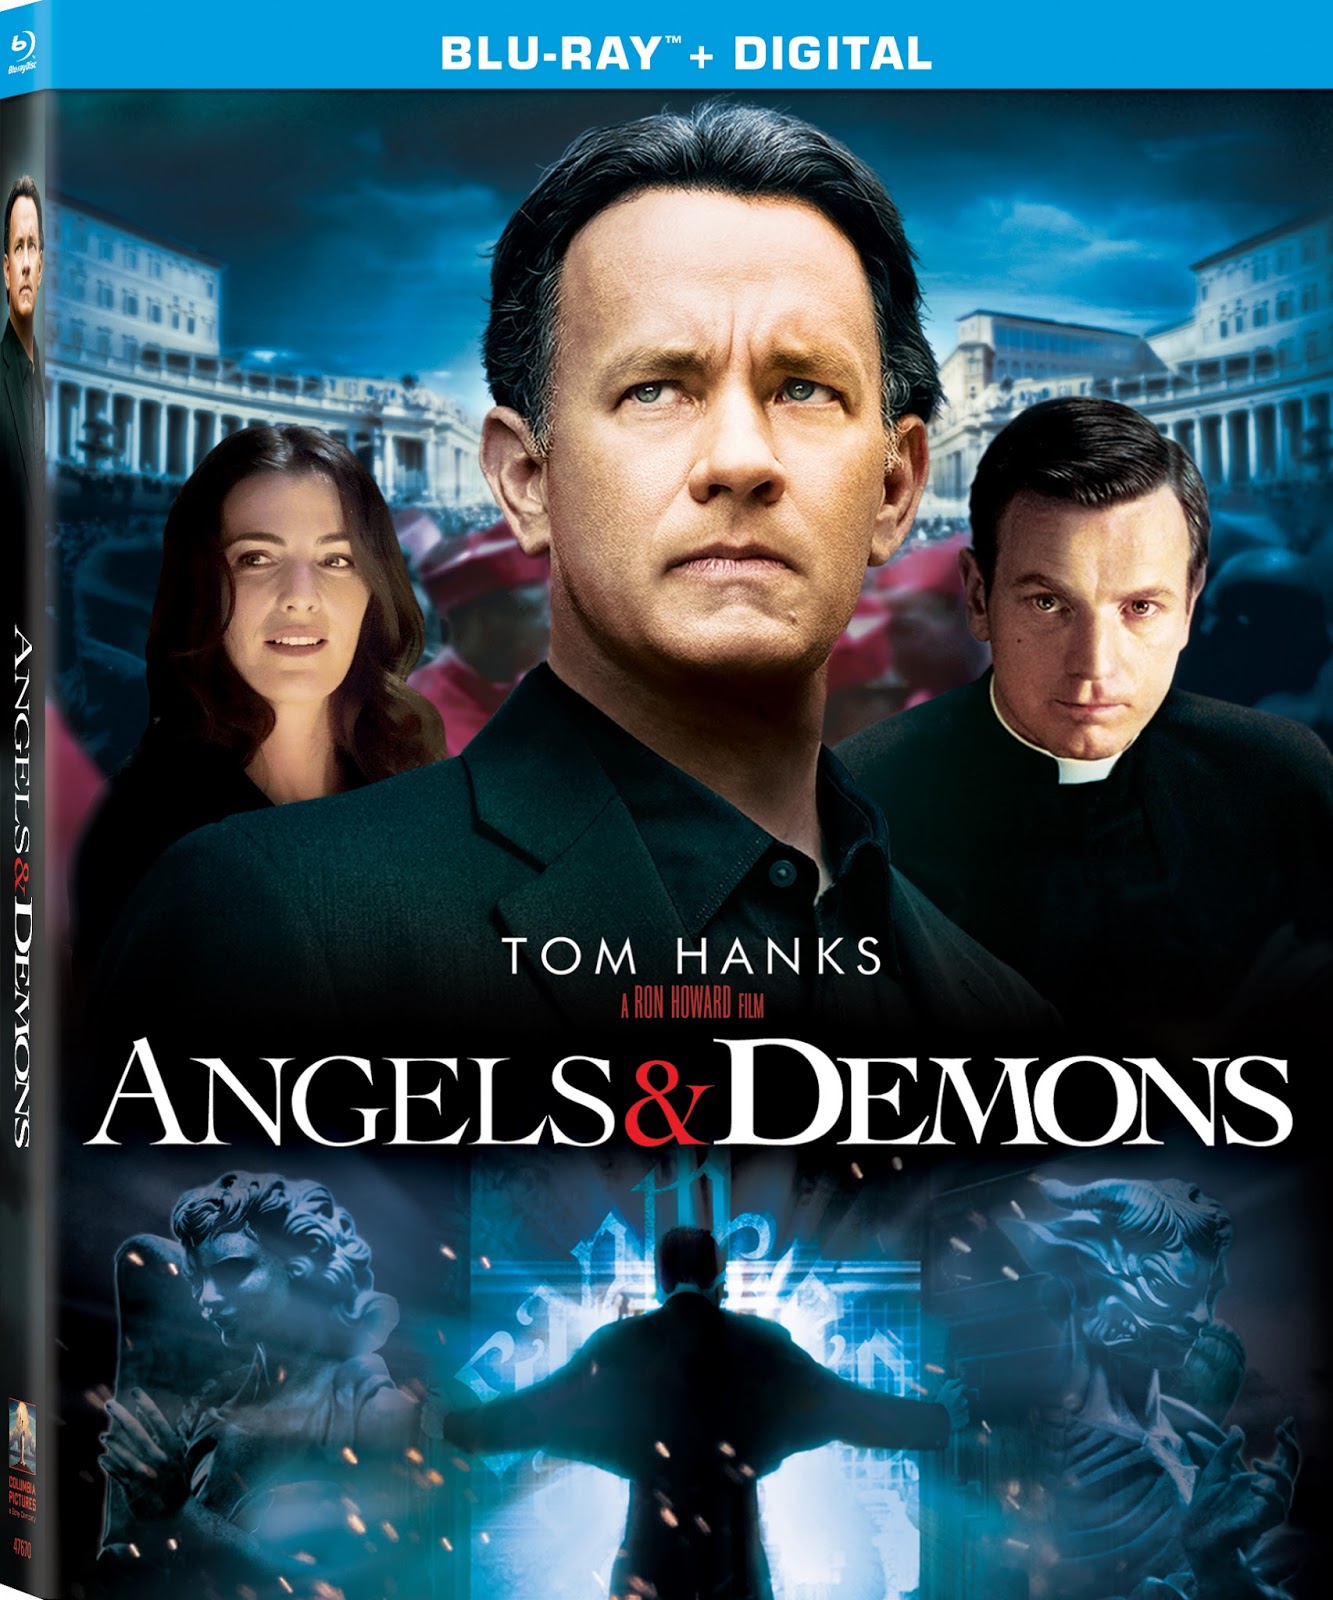 Free Kittens Movie Guide Blu Ray Review The Da Vinci Code Angels Demons